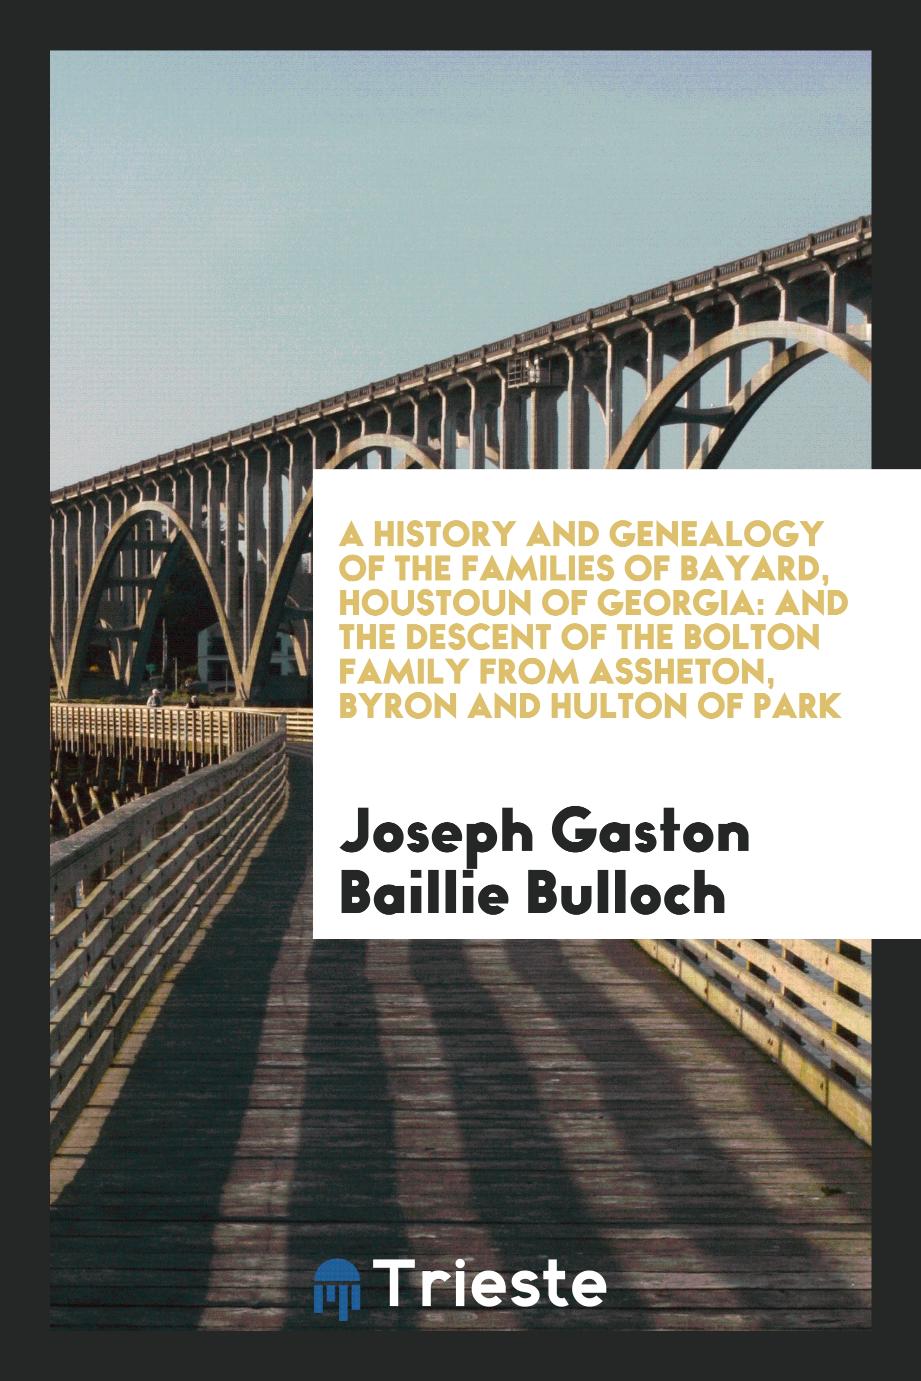 A History and Genealogy of the Families of Bayard, Houstoun of Georgia: and the Descent of the Bolton Family from Assheton, Byron and Hulton of Park